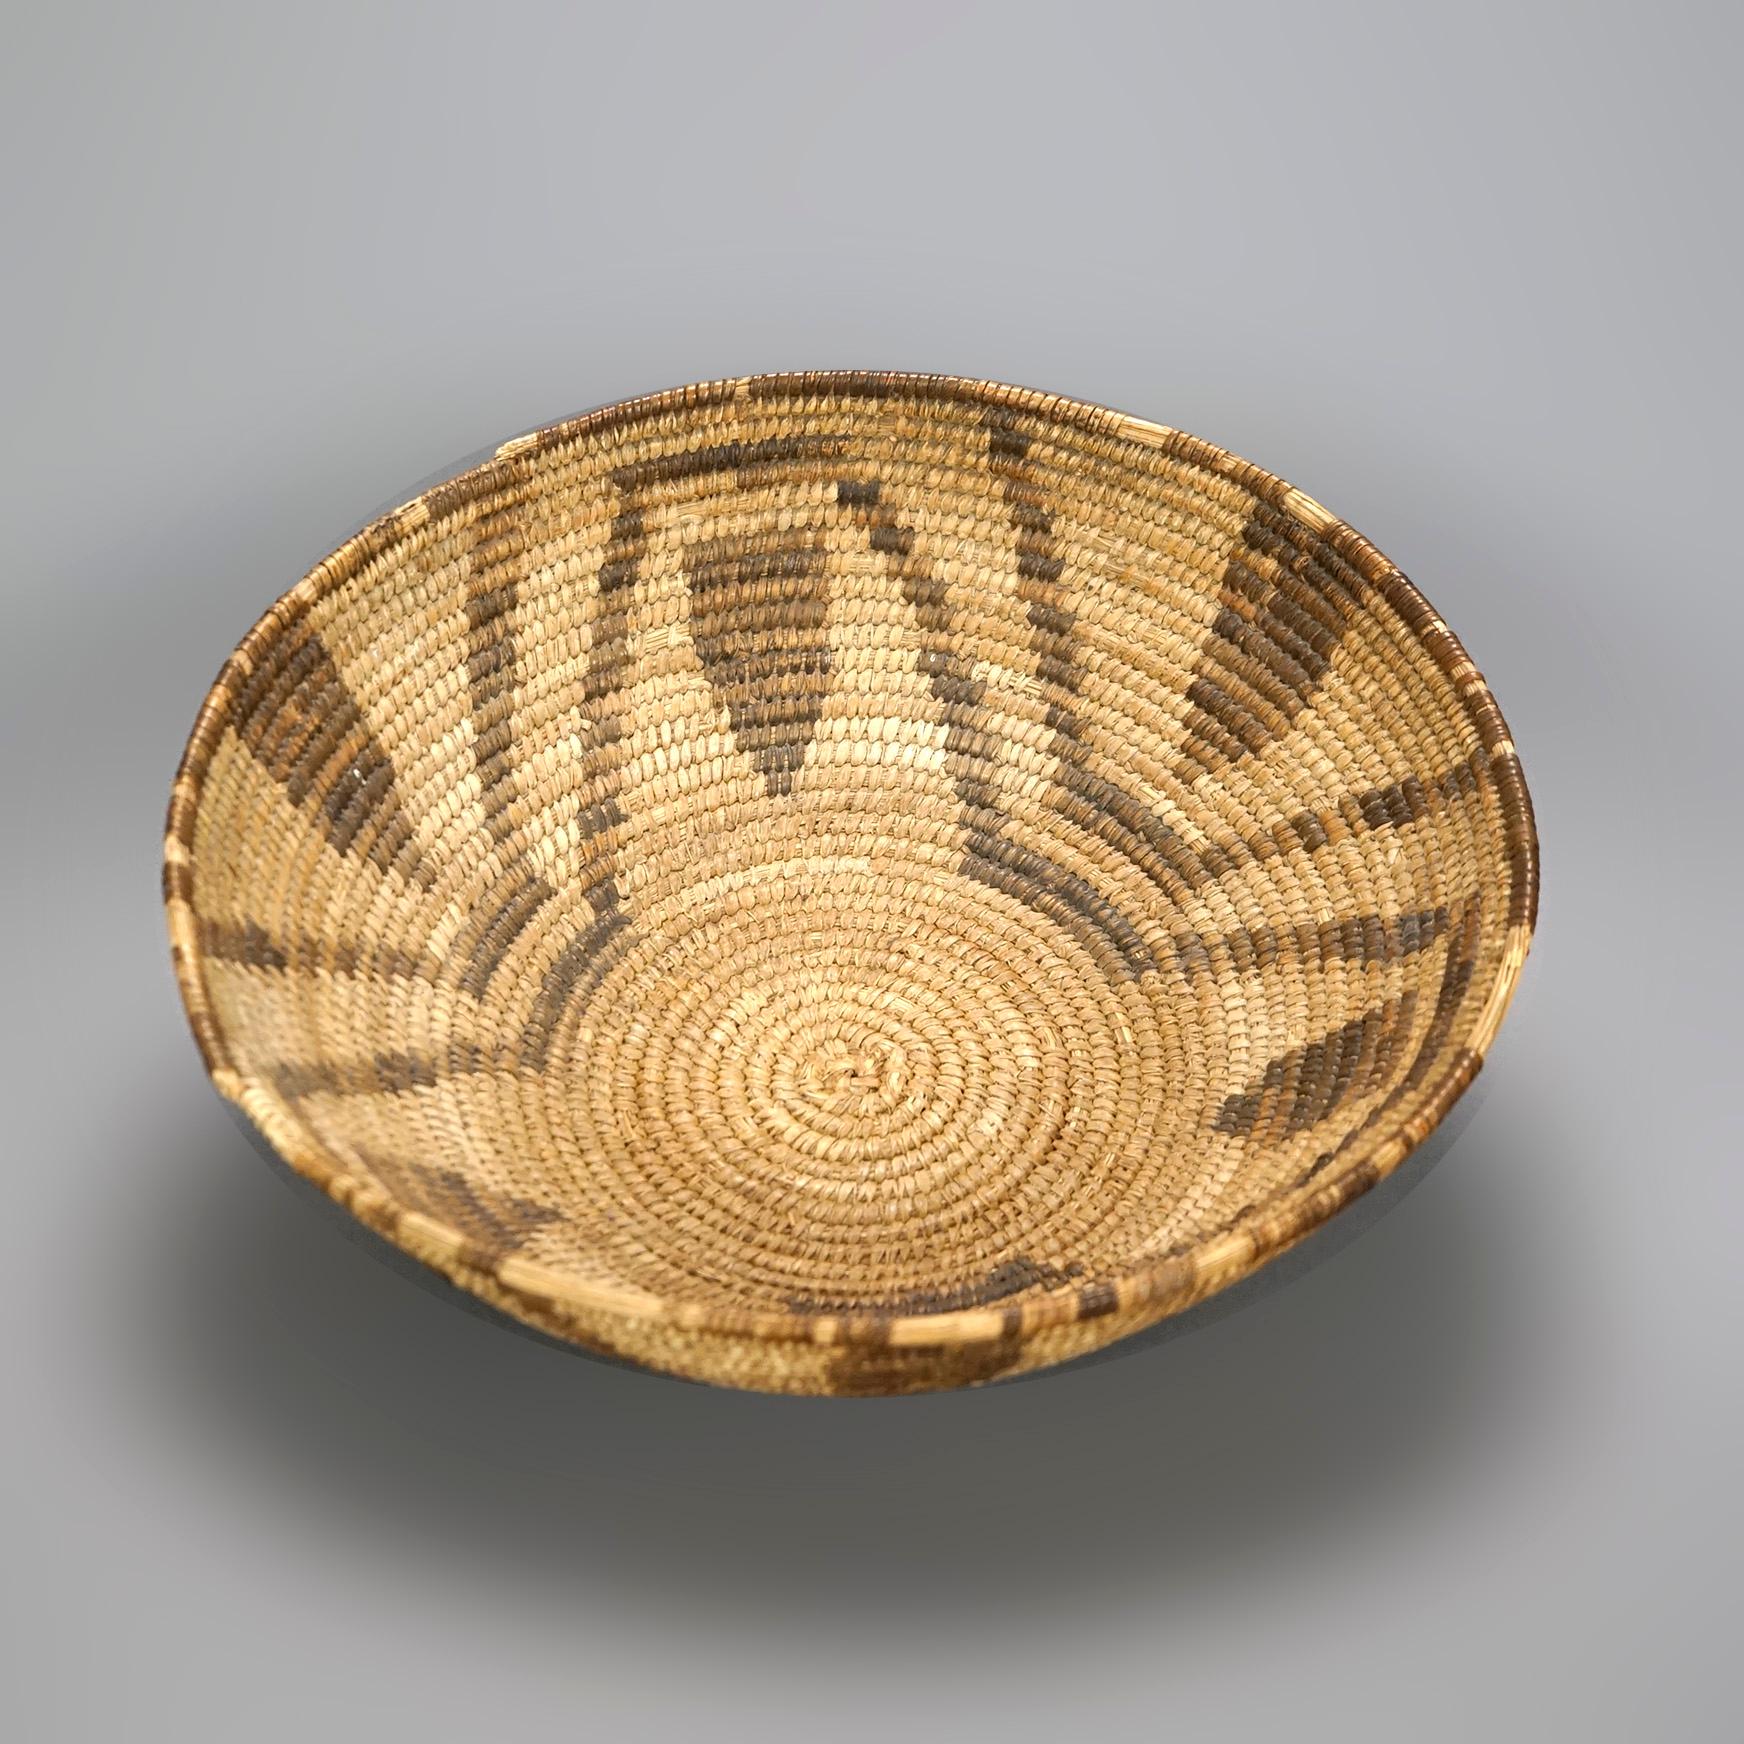 An antique Southwestern American Indian basket offers hand woven construction with flared sides and repeating geometric design, c1920

Measures- 4.25''H x 12.75''W x 12.5''D